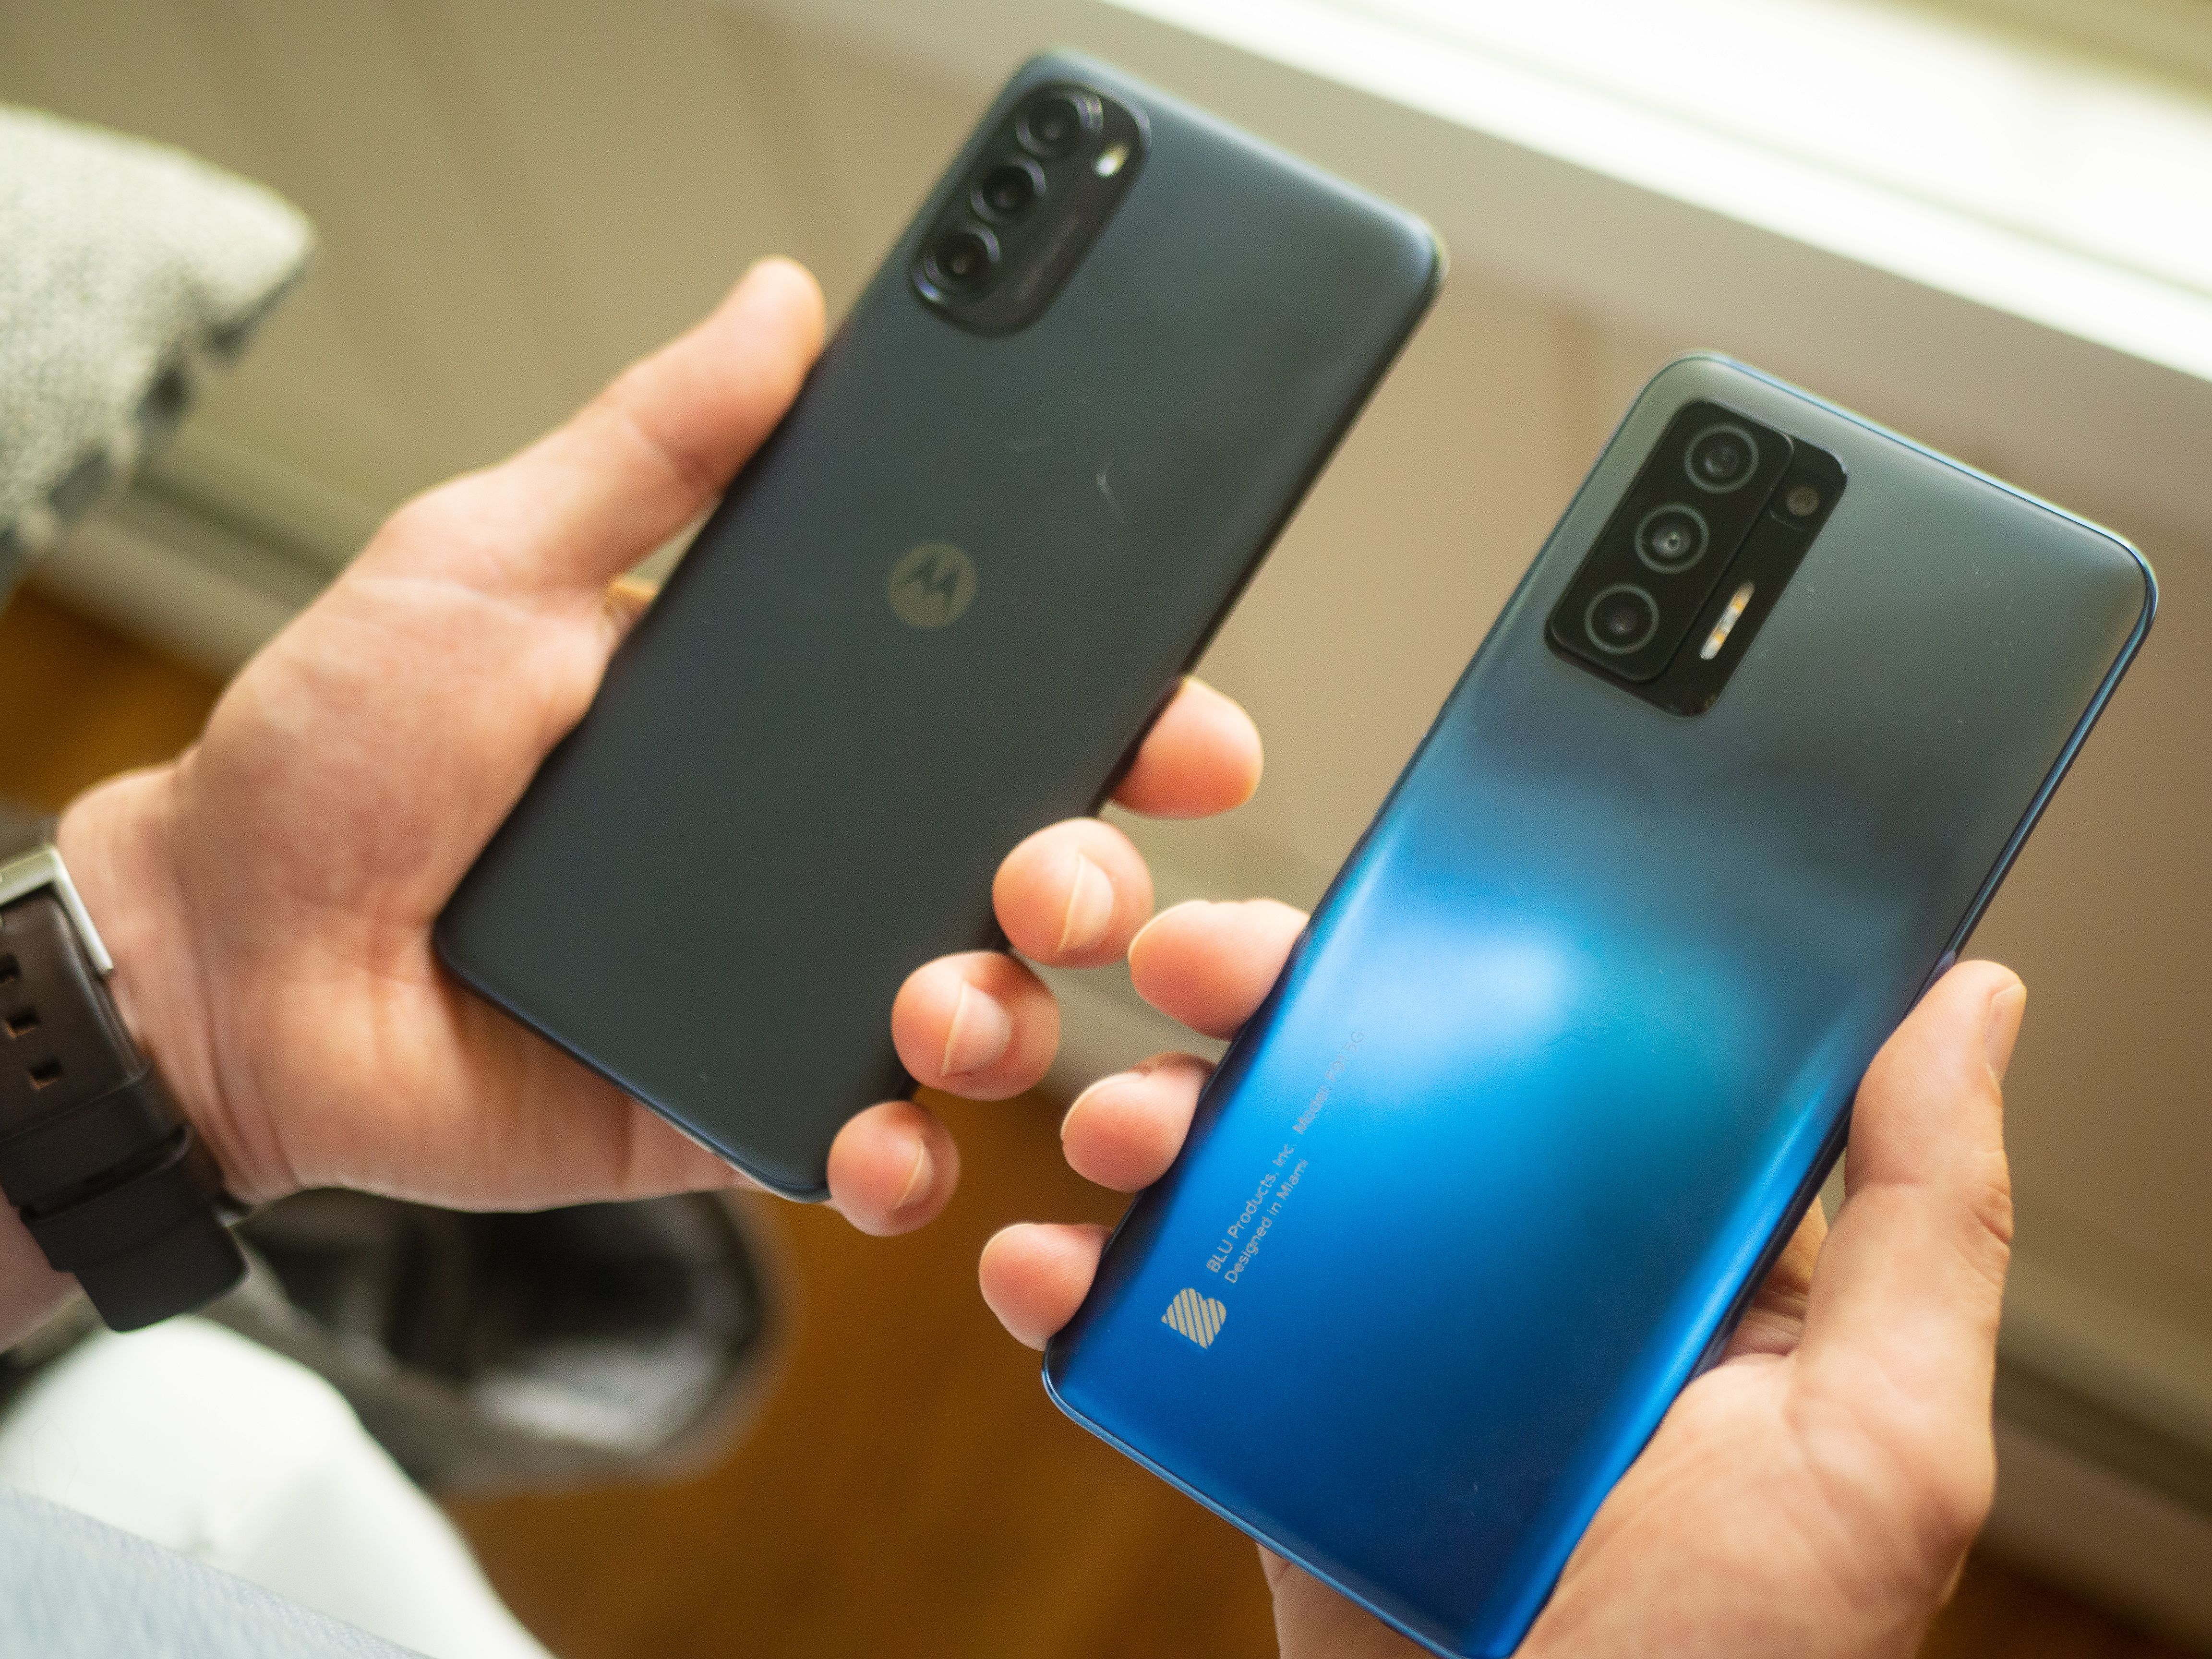 cheap-blu-f91-5g-and-moto-g-5g-fight-for-budget-supremacy-or-digital-trends